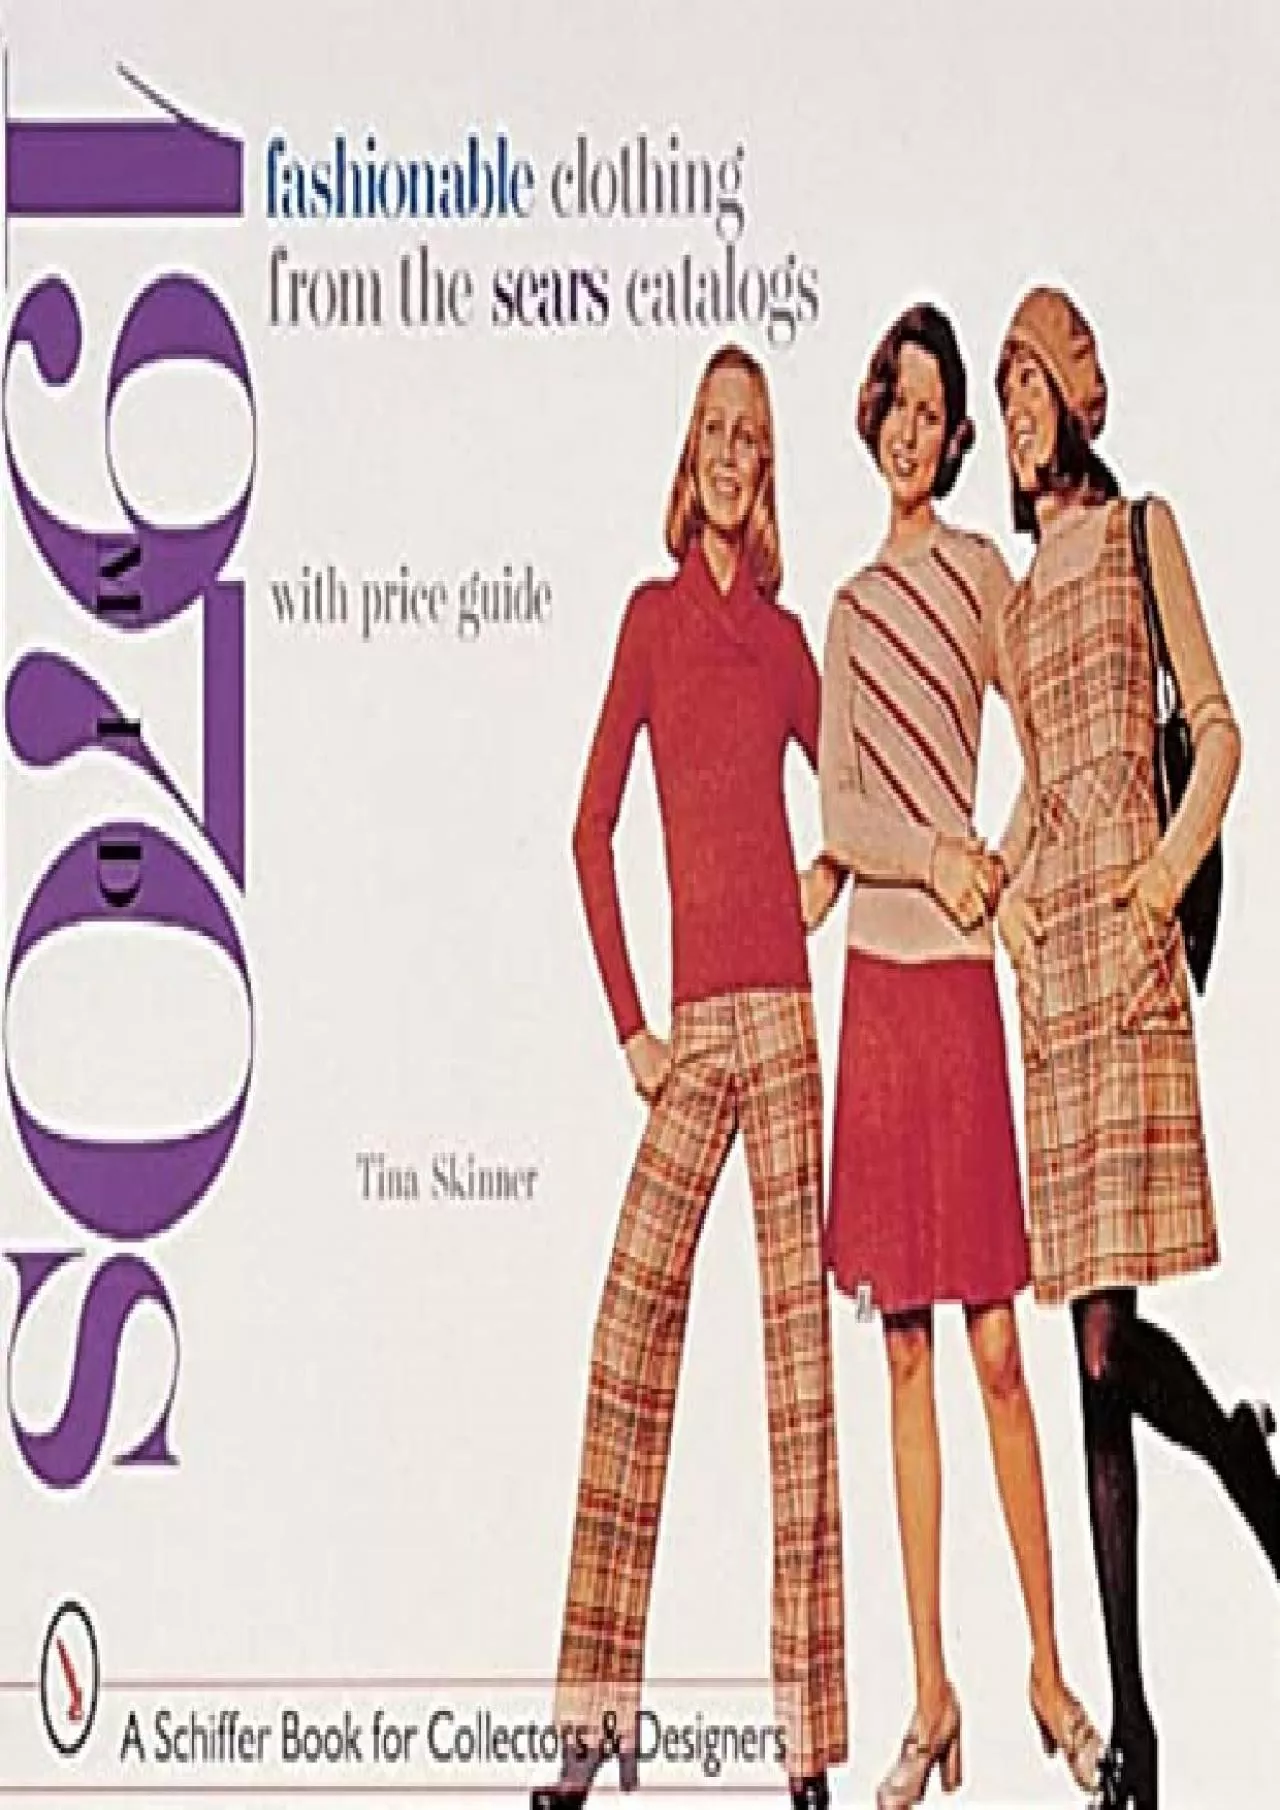 [BOOK]-Fashionable Clothing from the Sears Catalogs: Mid-1970s (Schiffer Book for Collectors